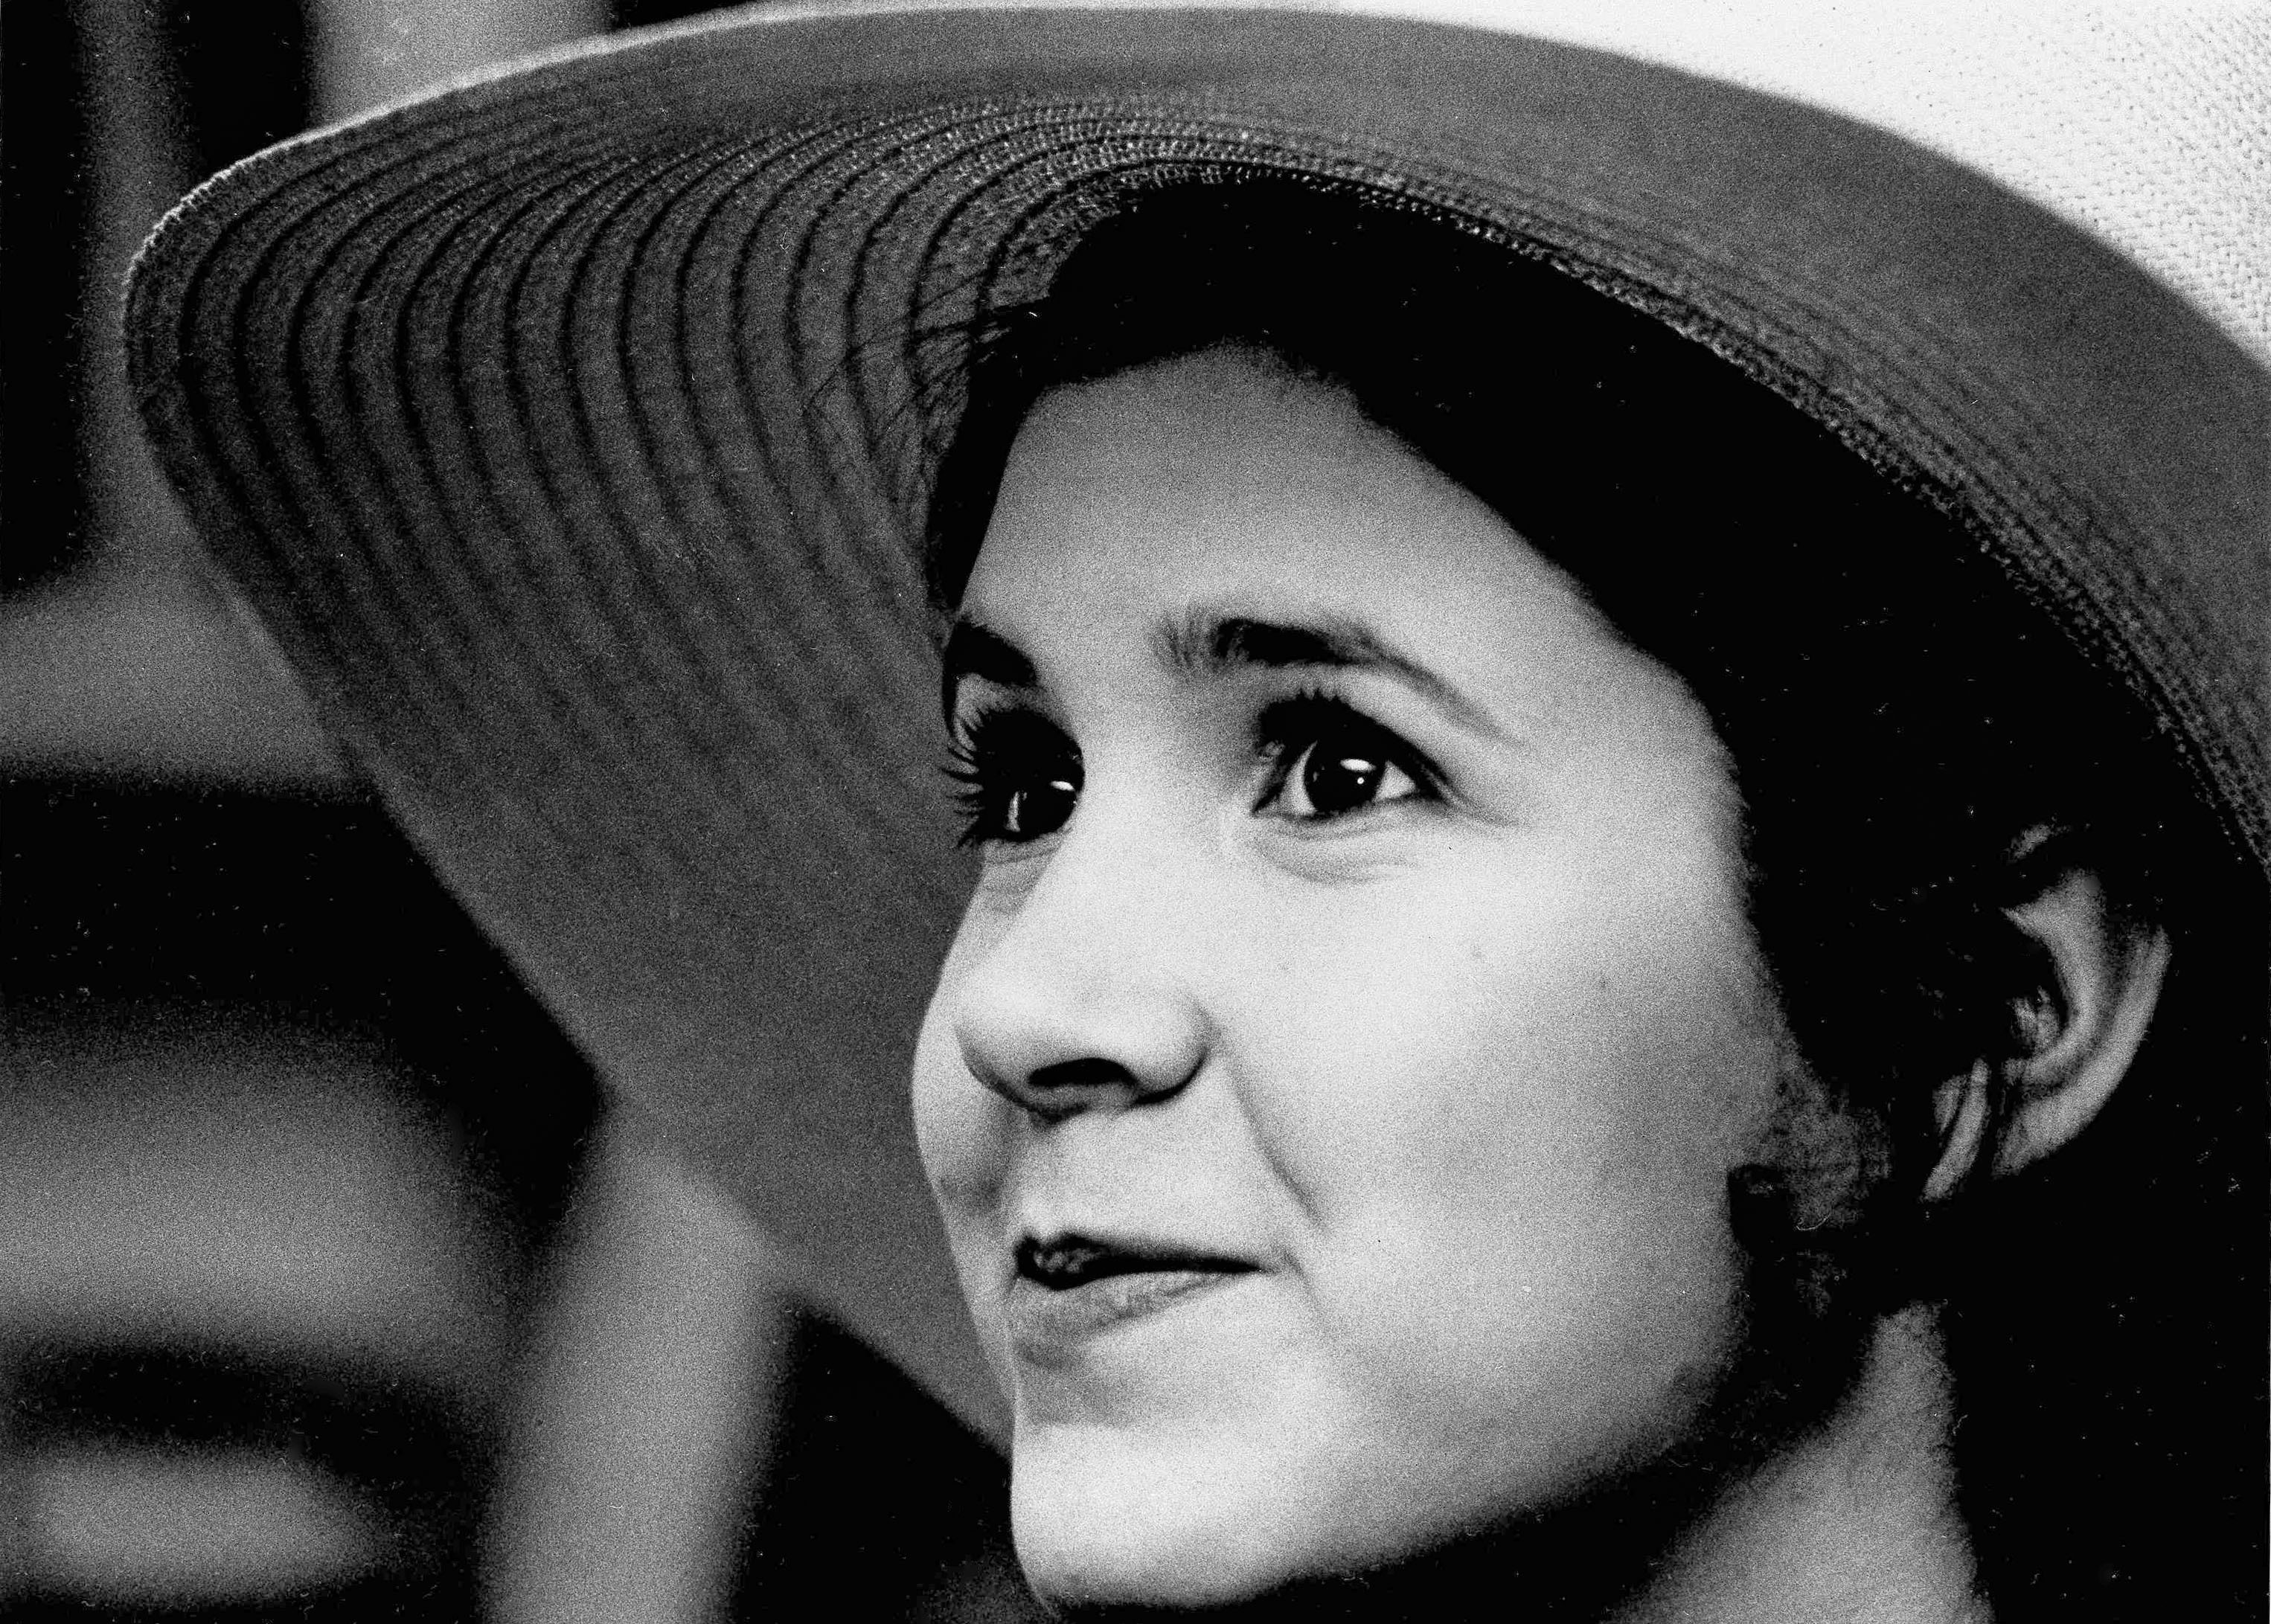 FILE - This May 2, 1973 file photo shows Carrie Fisher, the 16-year-old daughter of Debbie Reynolds and Eddie Fisher, in New York. On Tuesday, Dec. 27, 2016, a publicist says Carrie Fisher has died at the age of 60. (AP Photo/Jerry Mosey, File) Obit Carrie Fisher